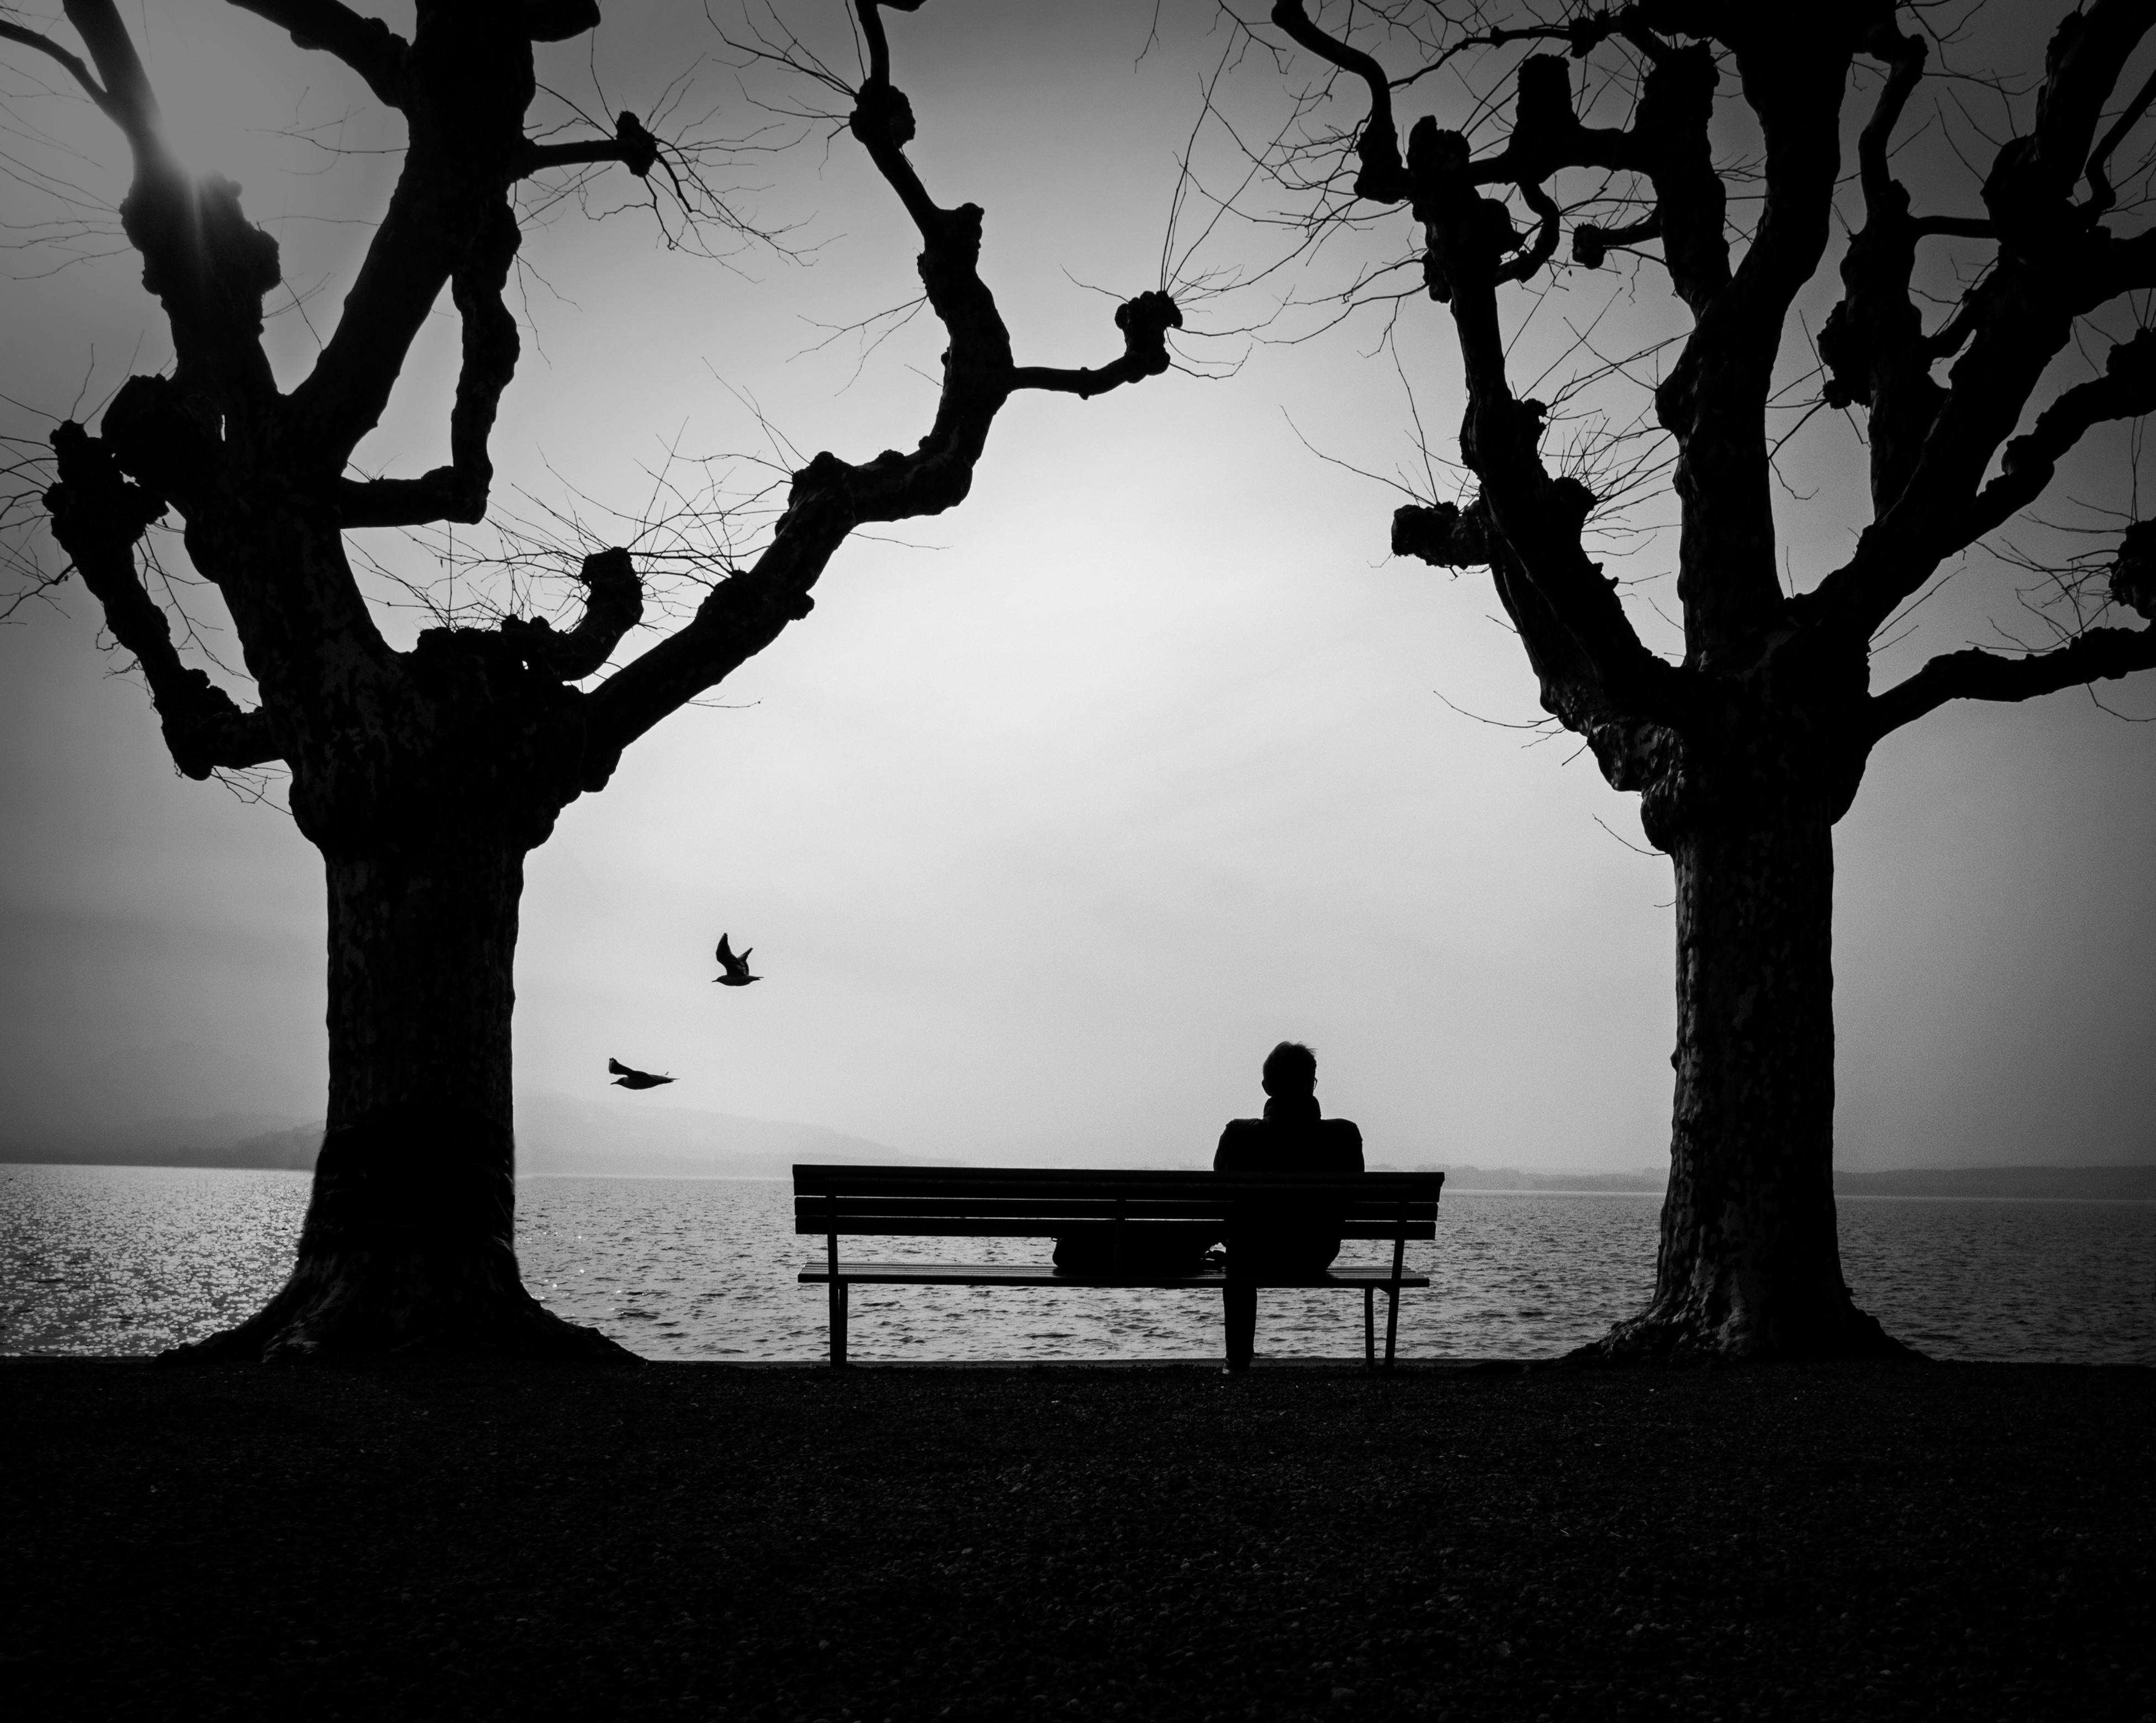 alone, loneliness, lonely, bench, silhouette, miscellanea, miscellaneous